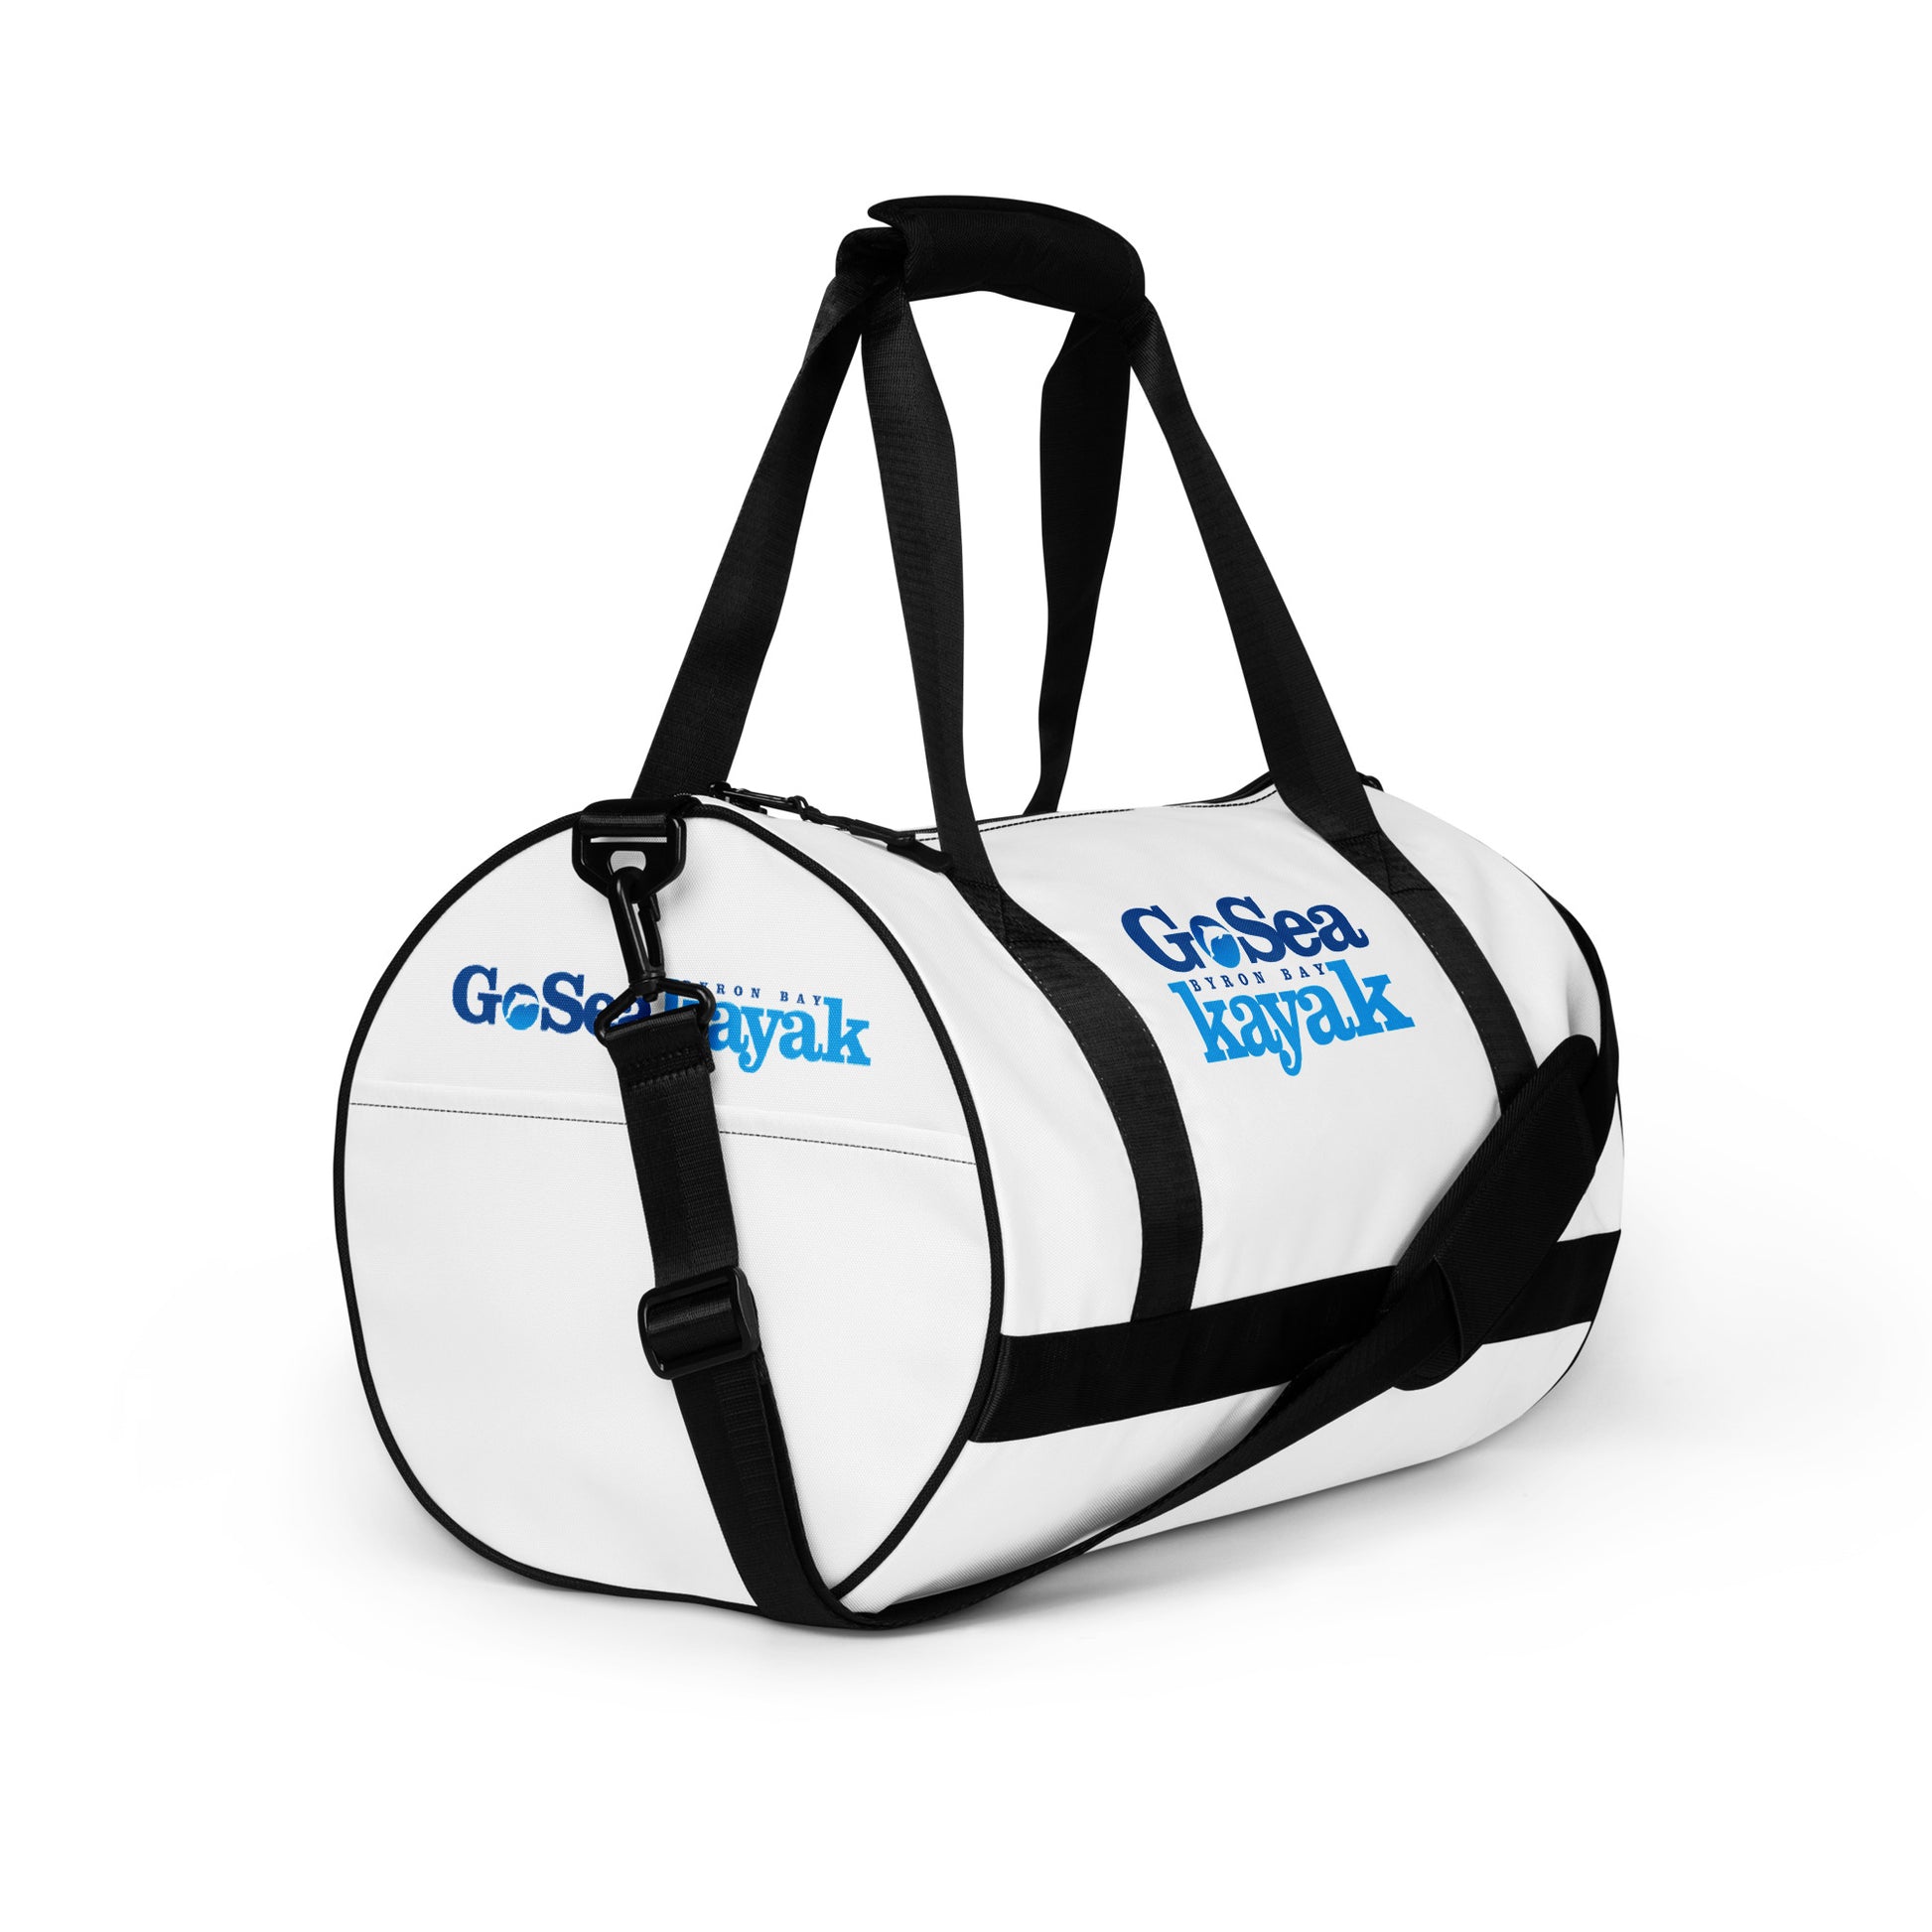  Gym Bag - White with black trim/detail - Front, side view - With Go Sea Kayak Byron Bay logo on both sides - Genuine Byron Bay Merchandise | Produced by Go Sea Kayak Byron Bay 